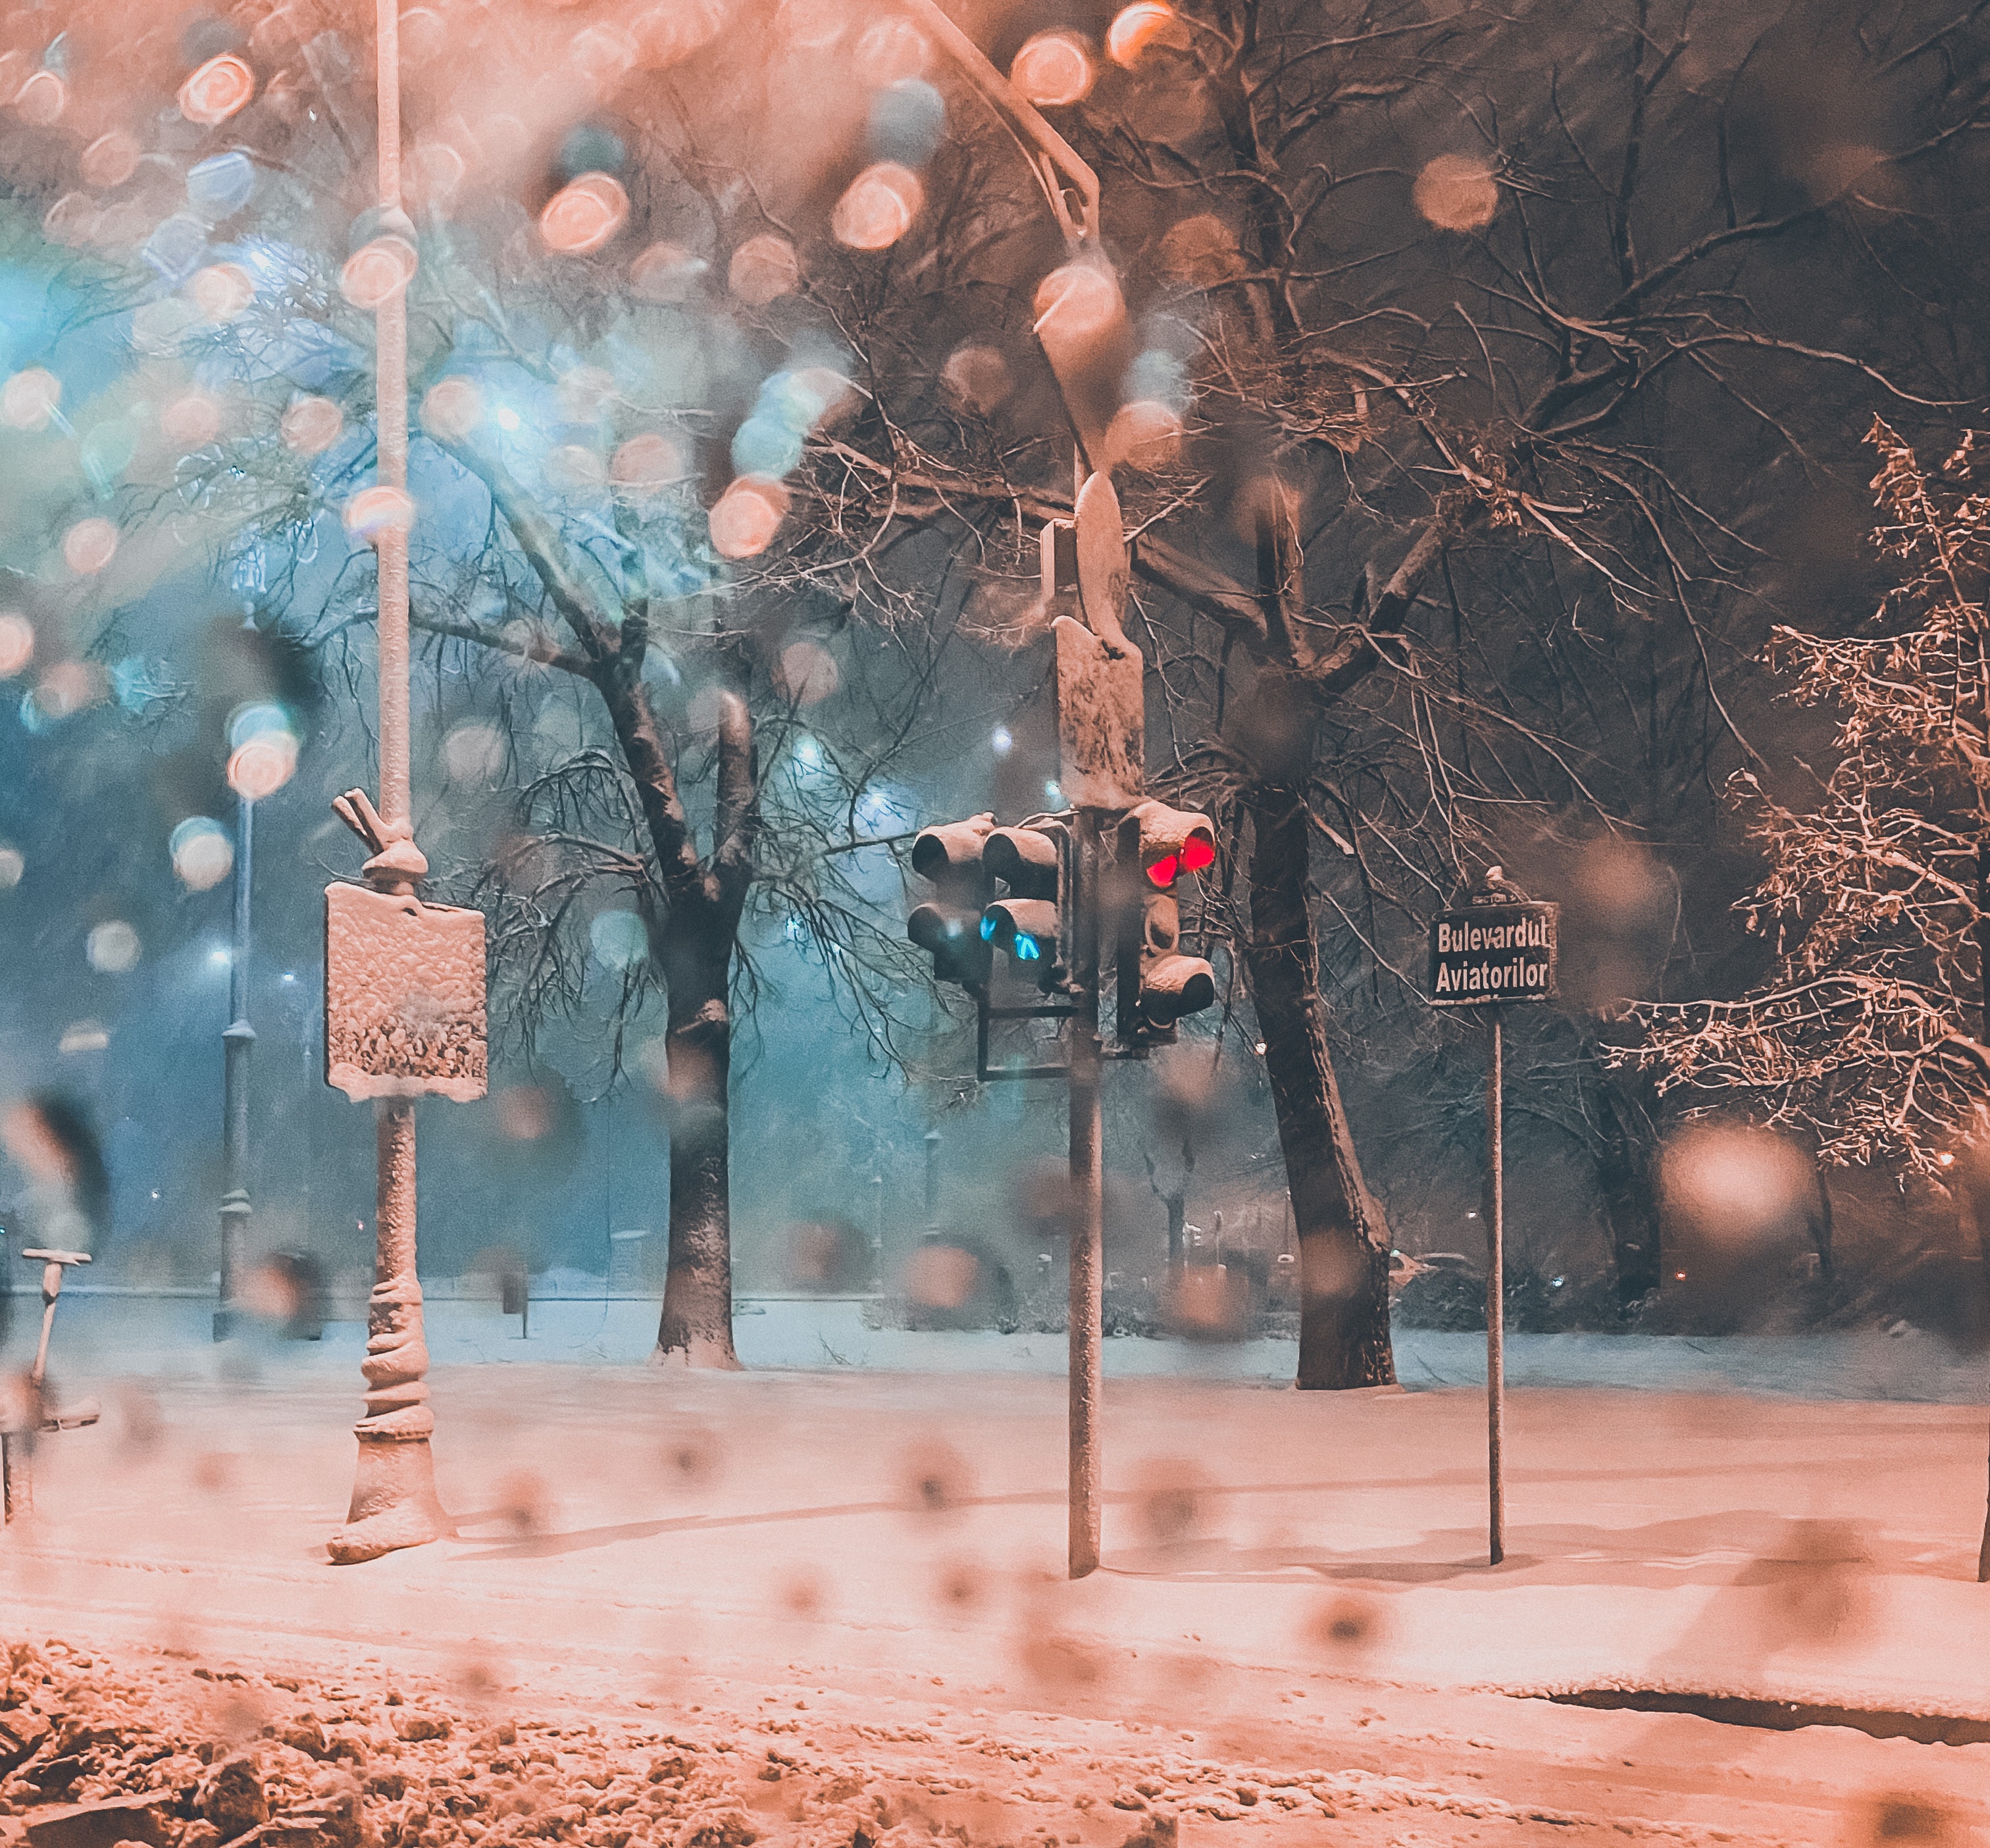 traffic light, winter, snow, miscellanea, miscellaneous, street, snowstorm wallpapers for tablet